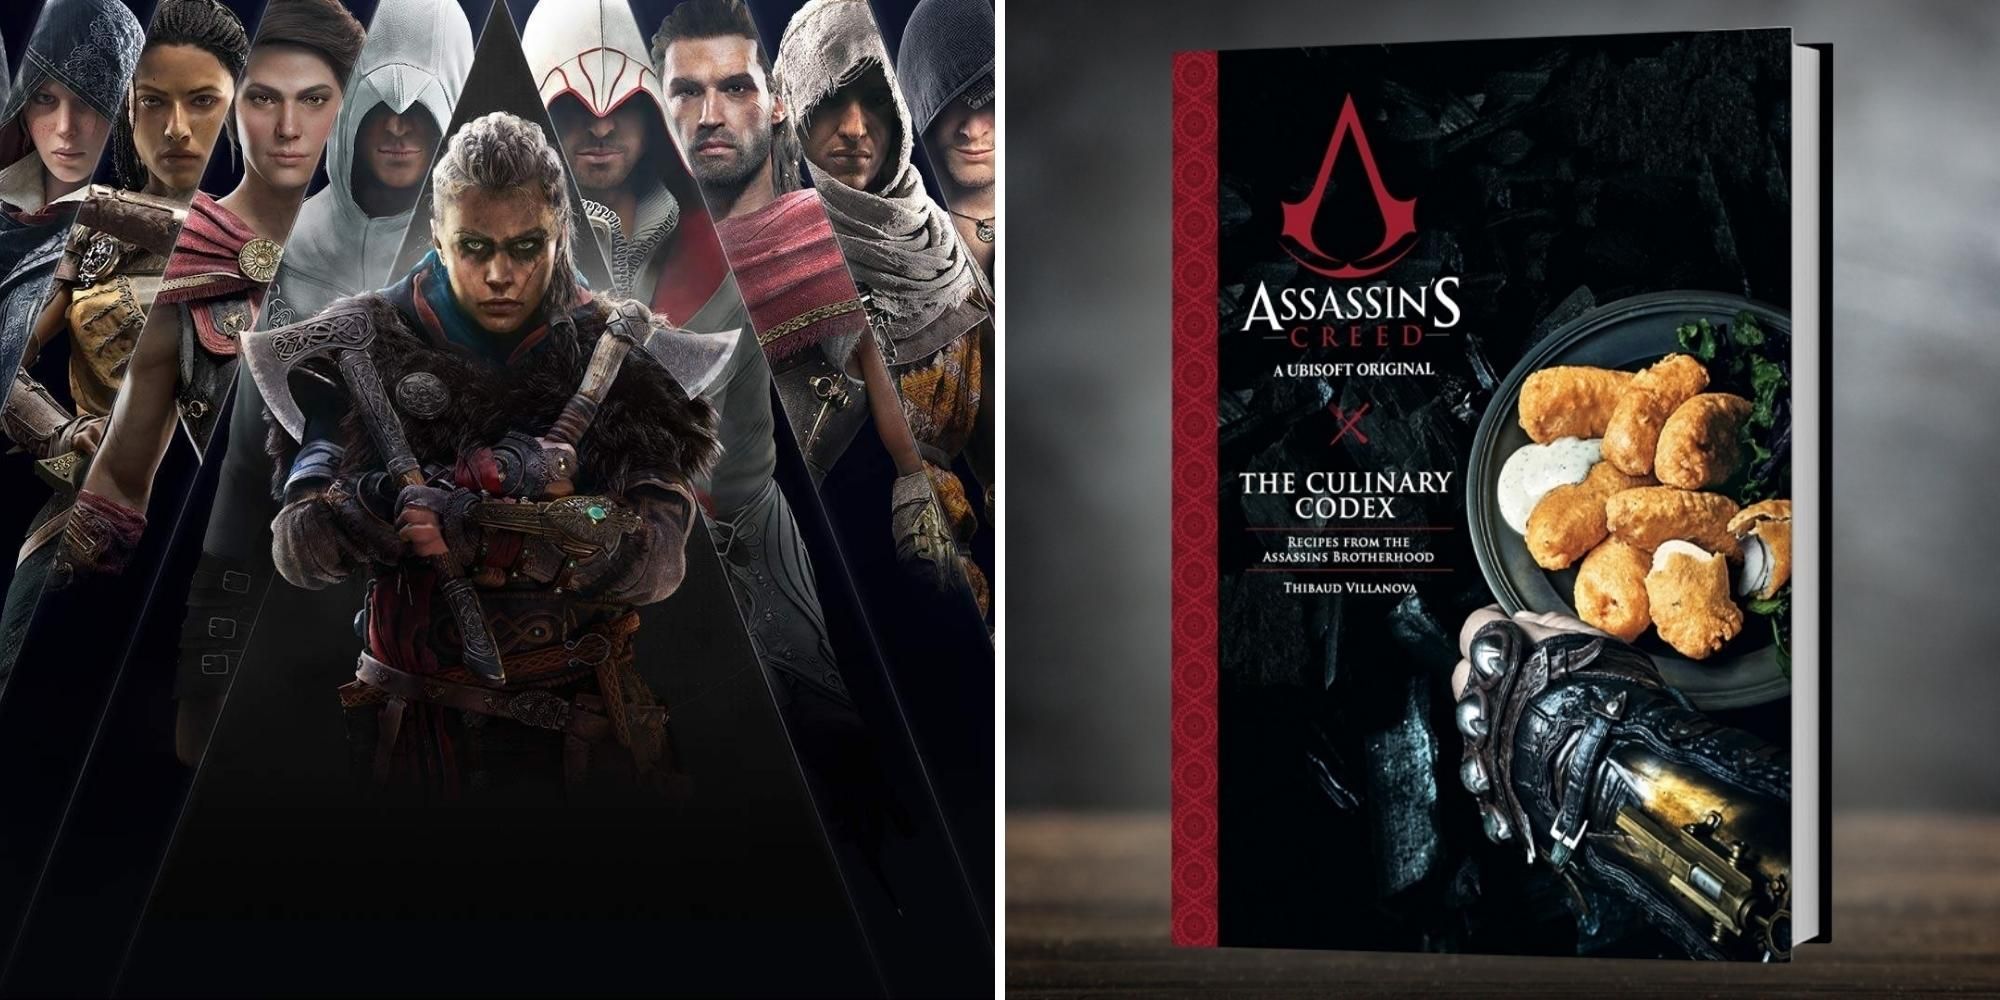 Assassins Creed characters from the franchise and The Culinary Codex cookbook